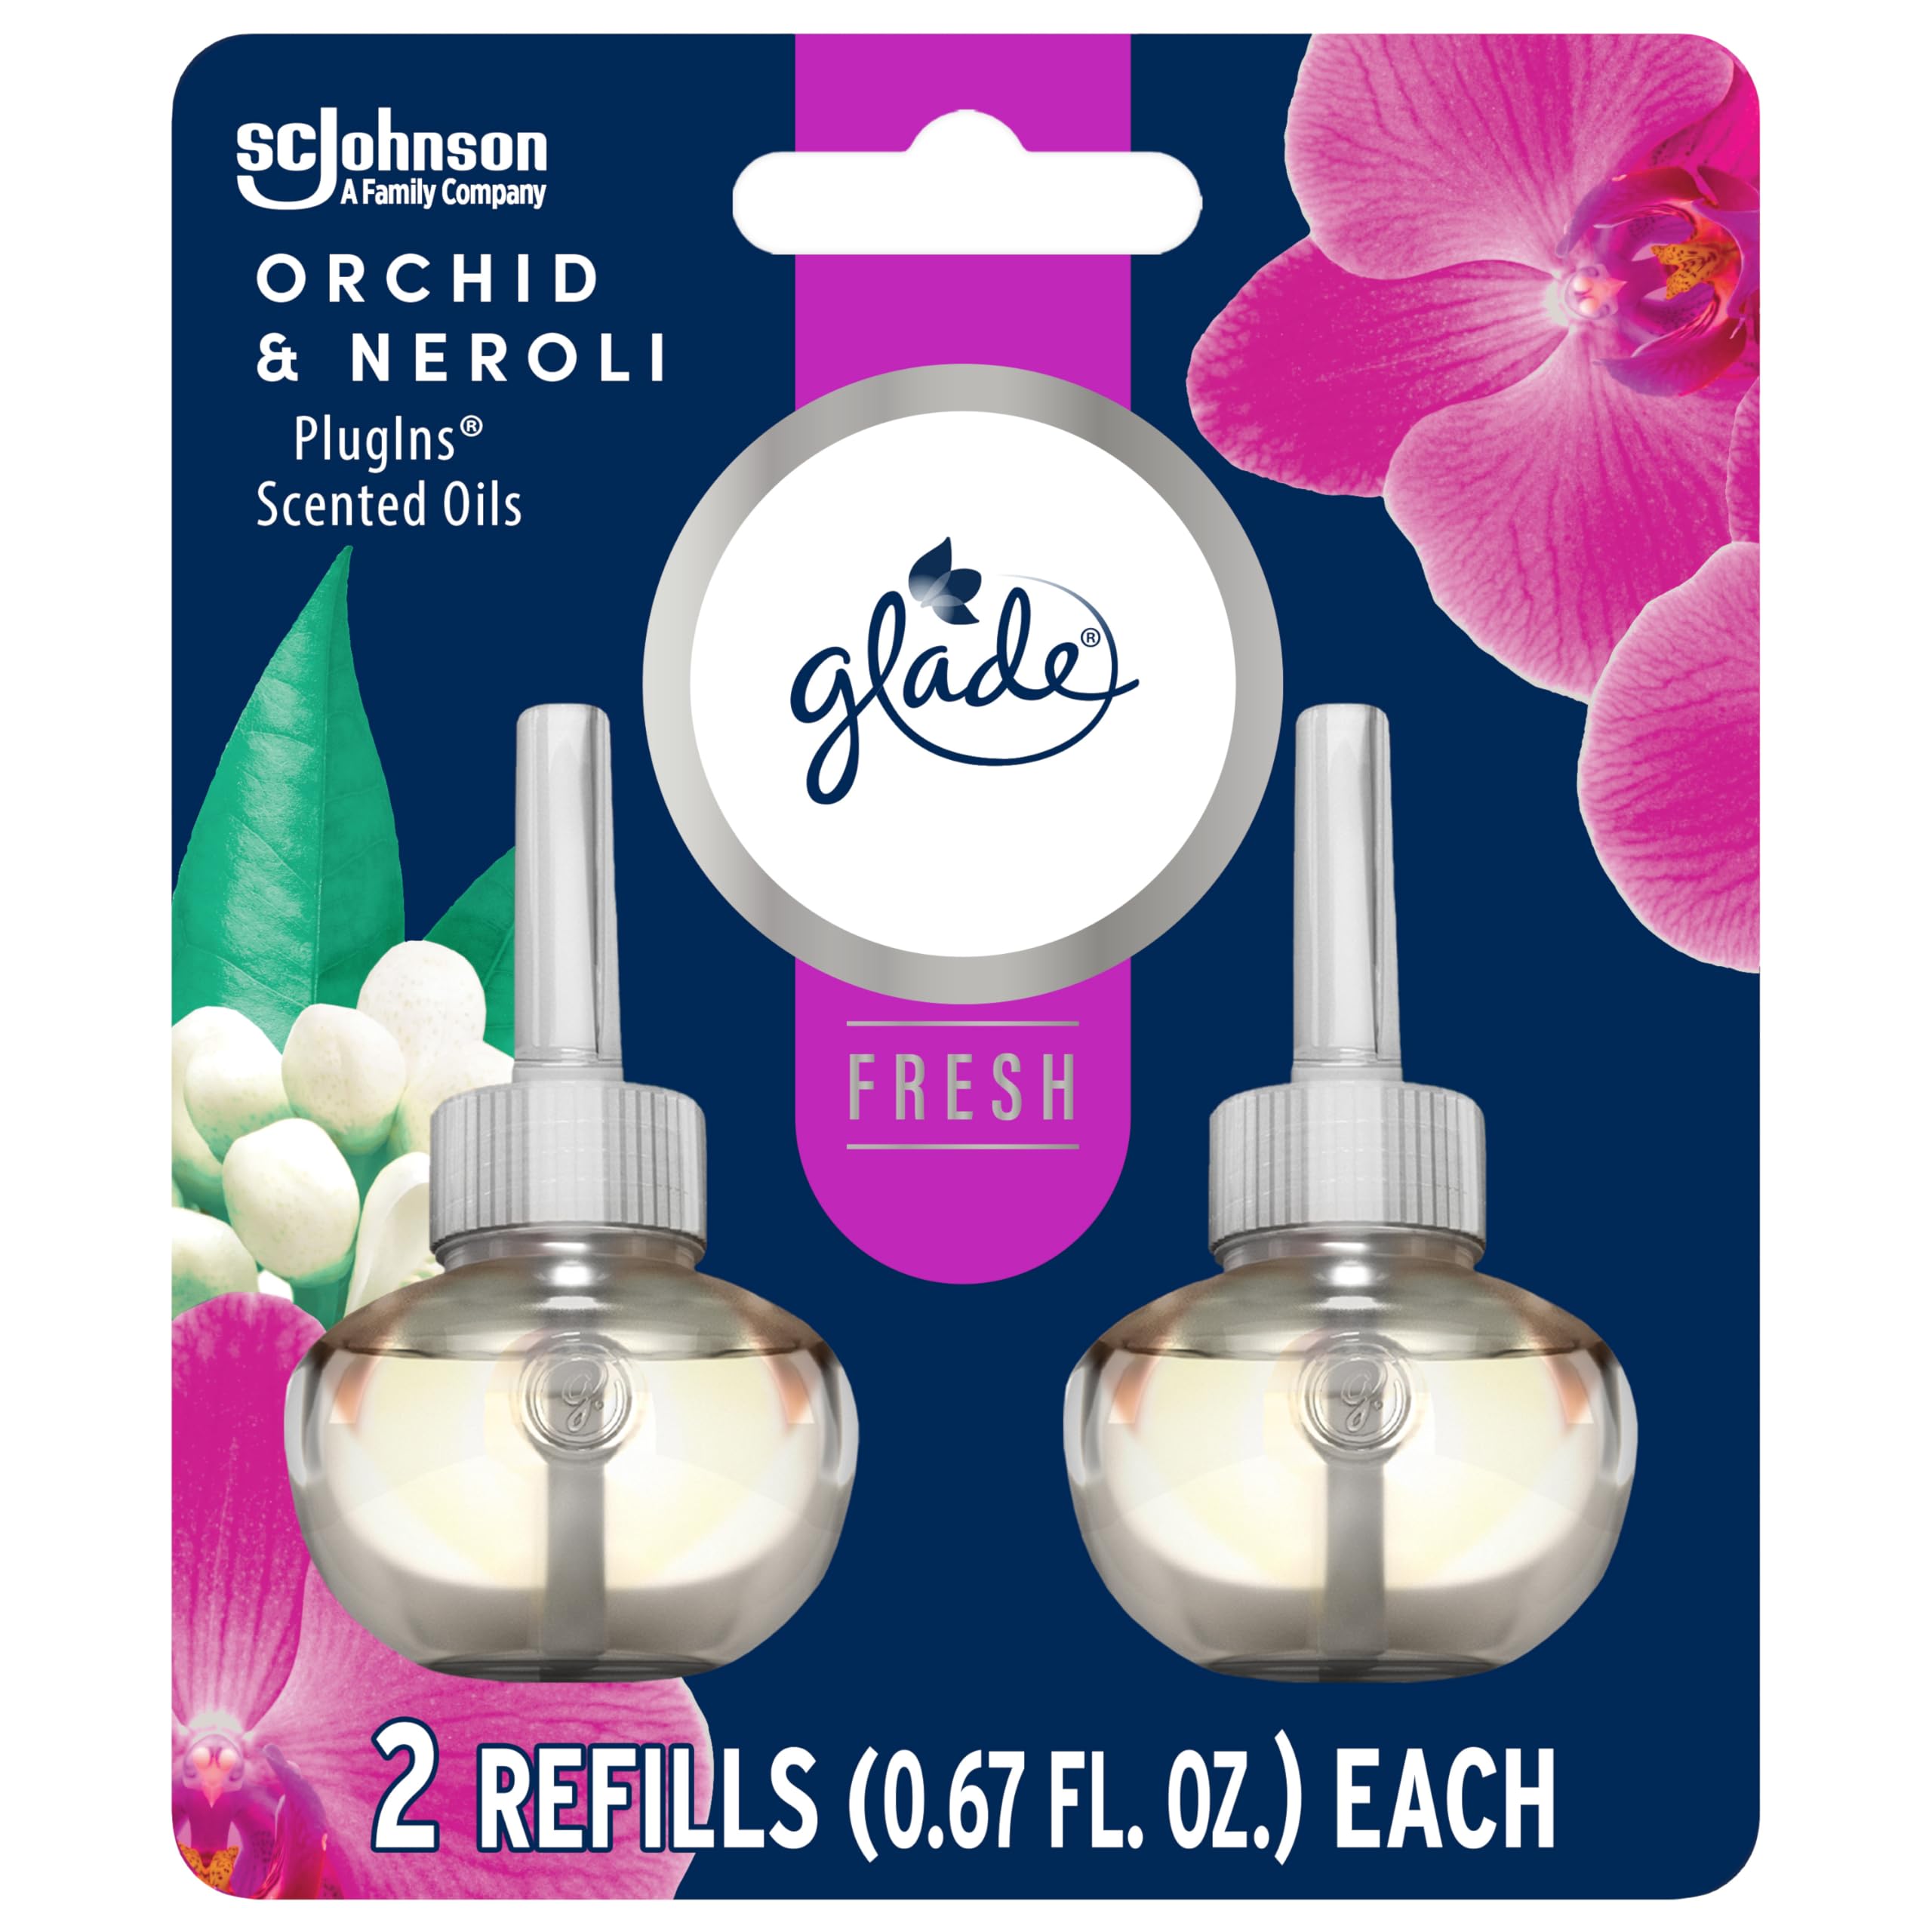 Glade PlugIns Refills Air Freshener, Scented and Essential Oils for Home and Bathroom, Orchid & Neroli, Fresh Collection 1.34 Fl Oz, 2 Count